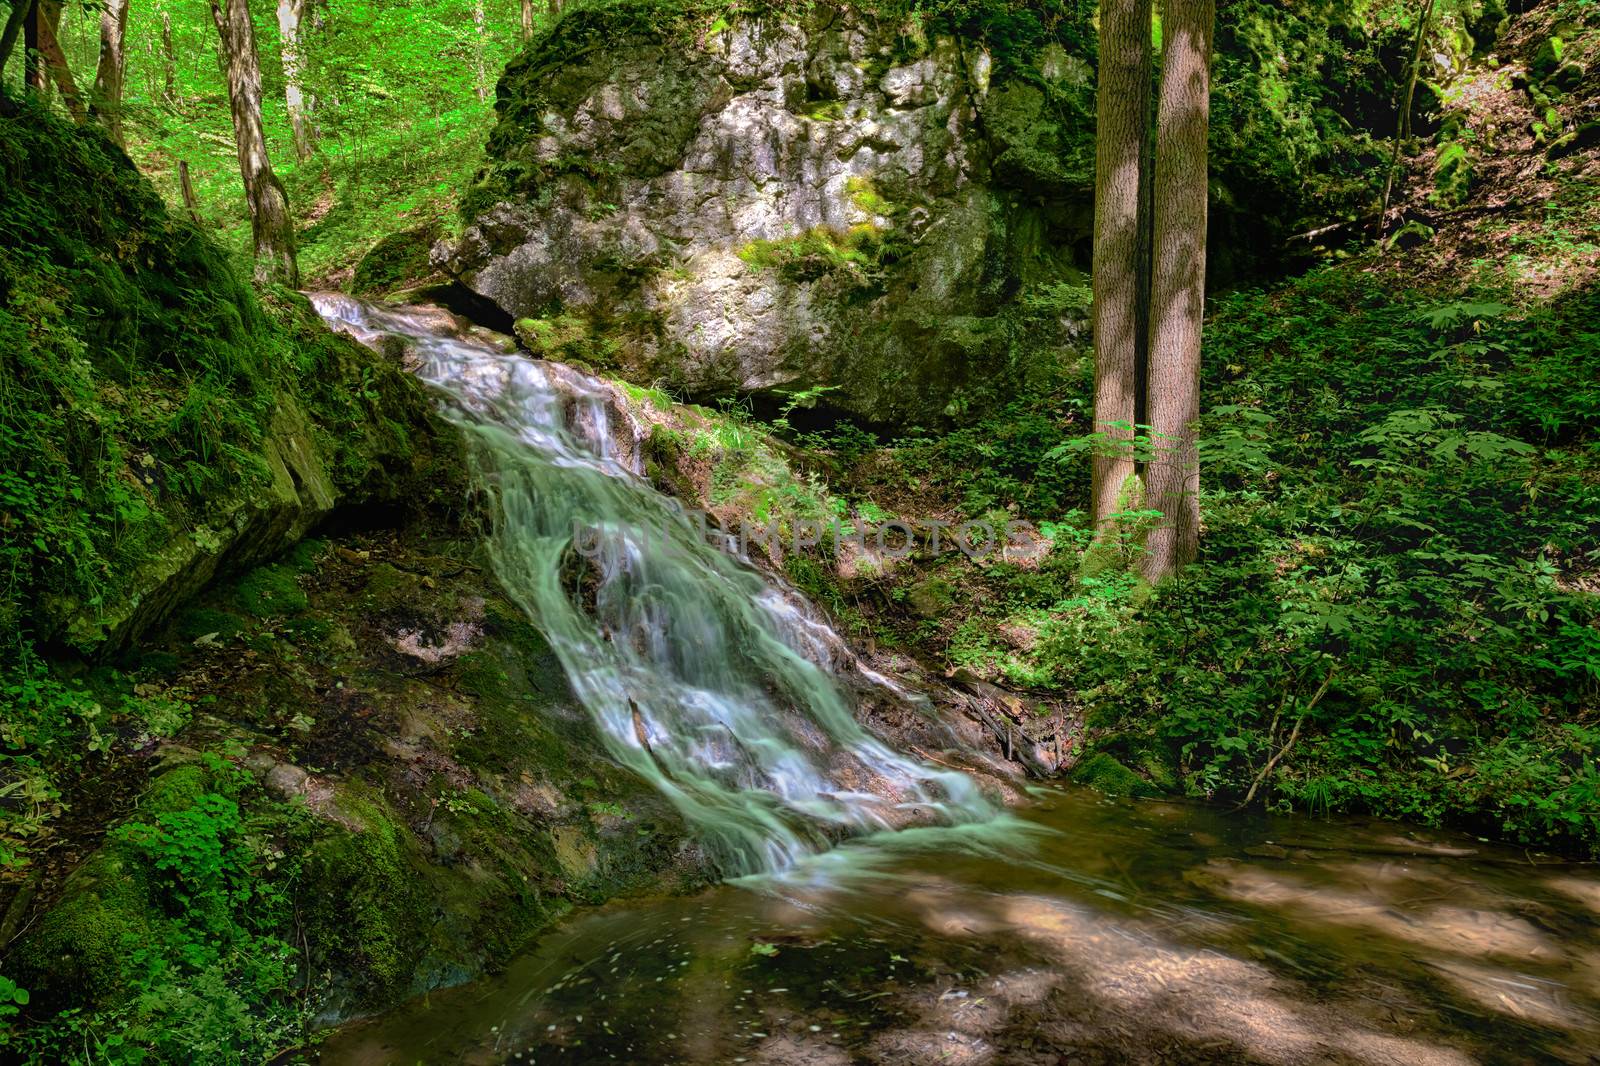 The river runs over cascades in the primeval forest - HDR